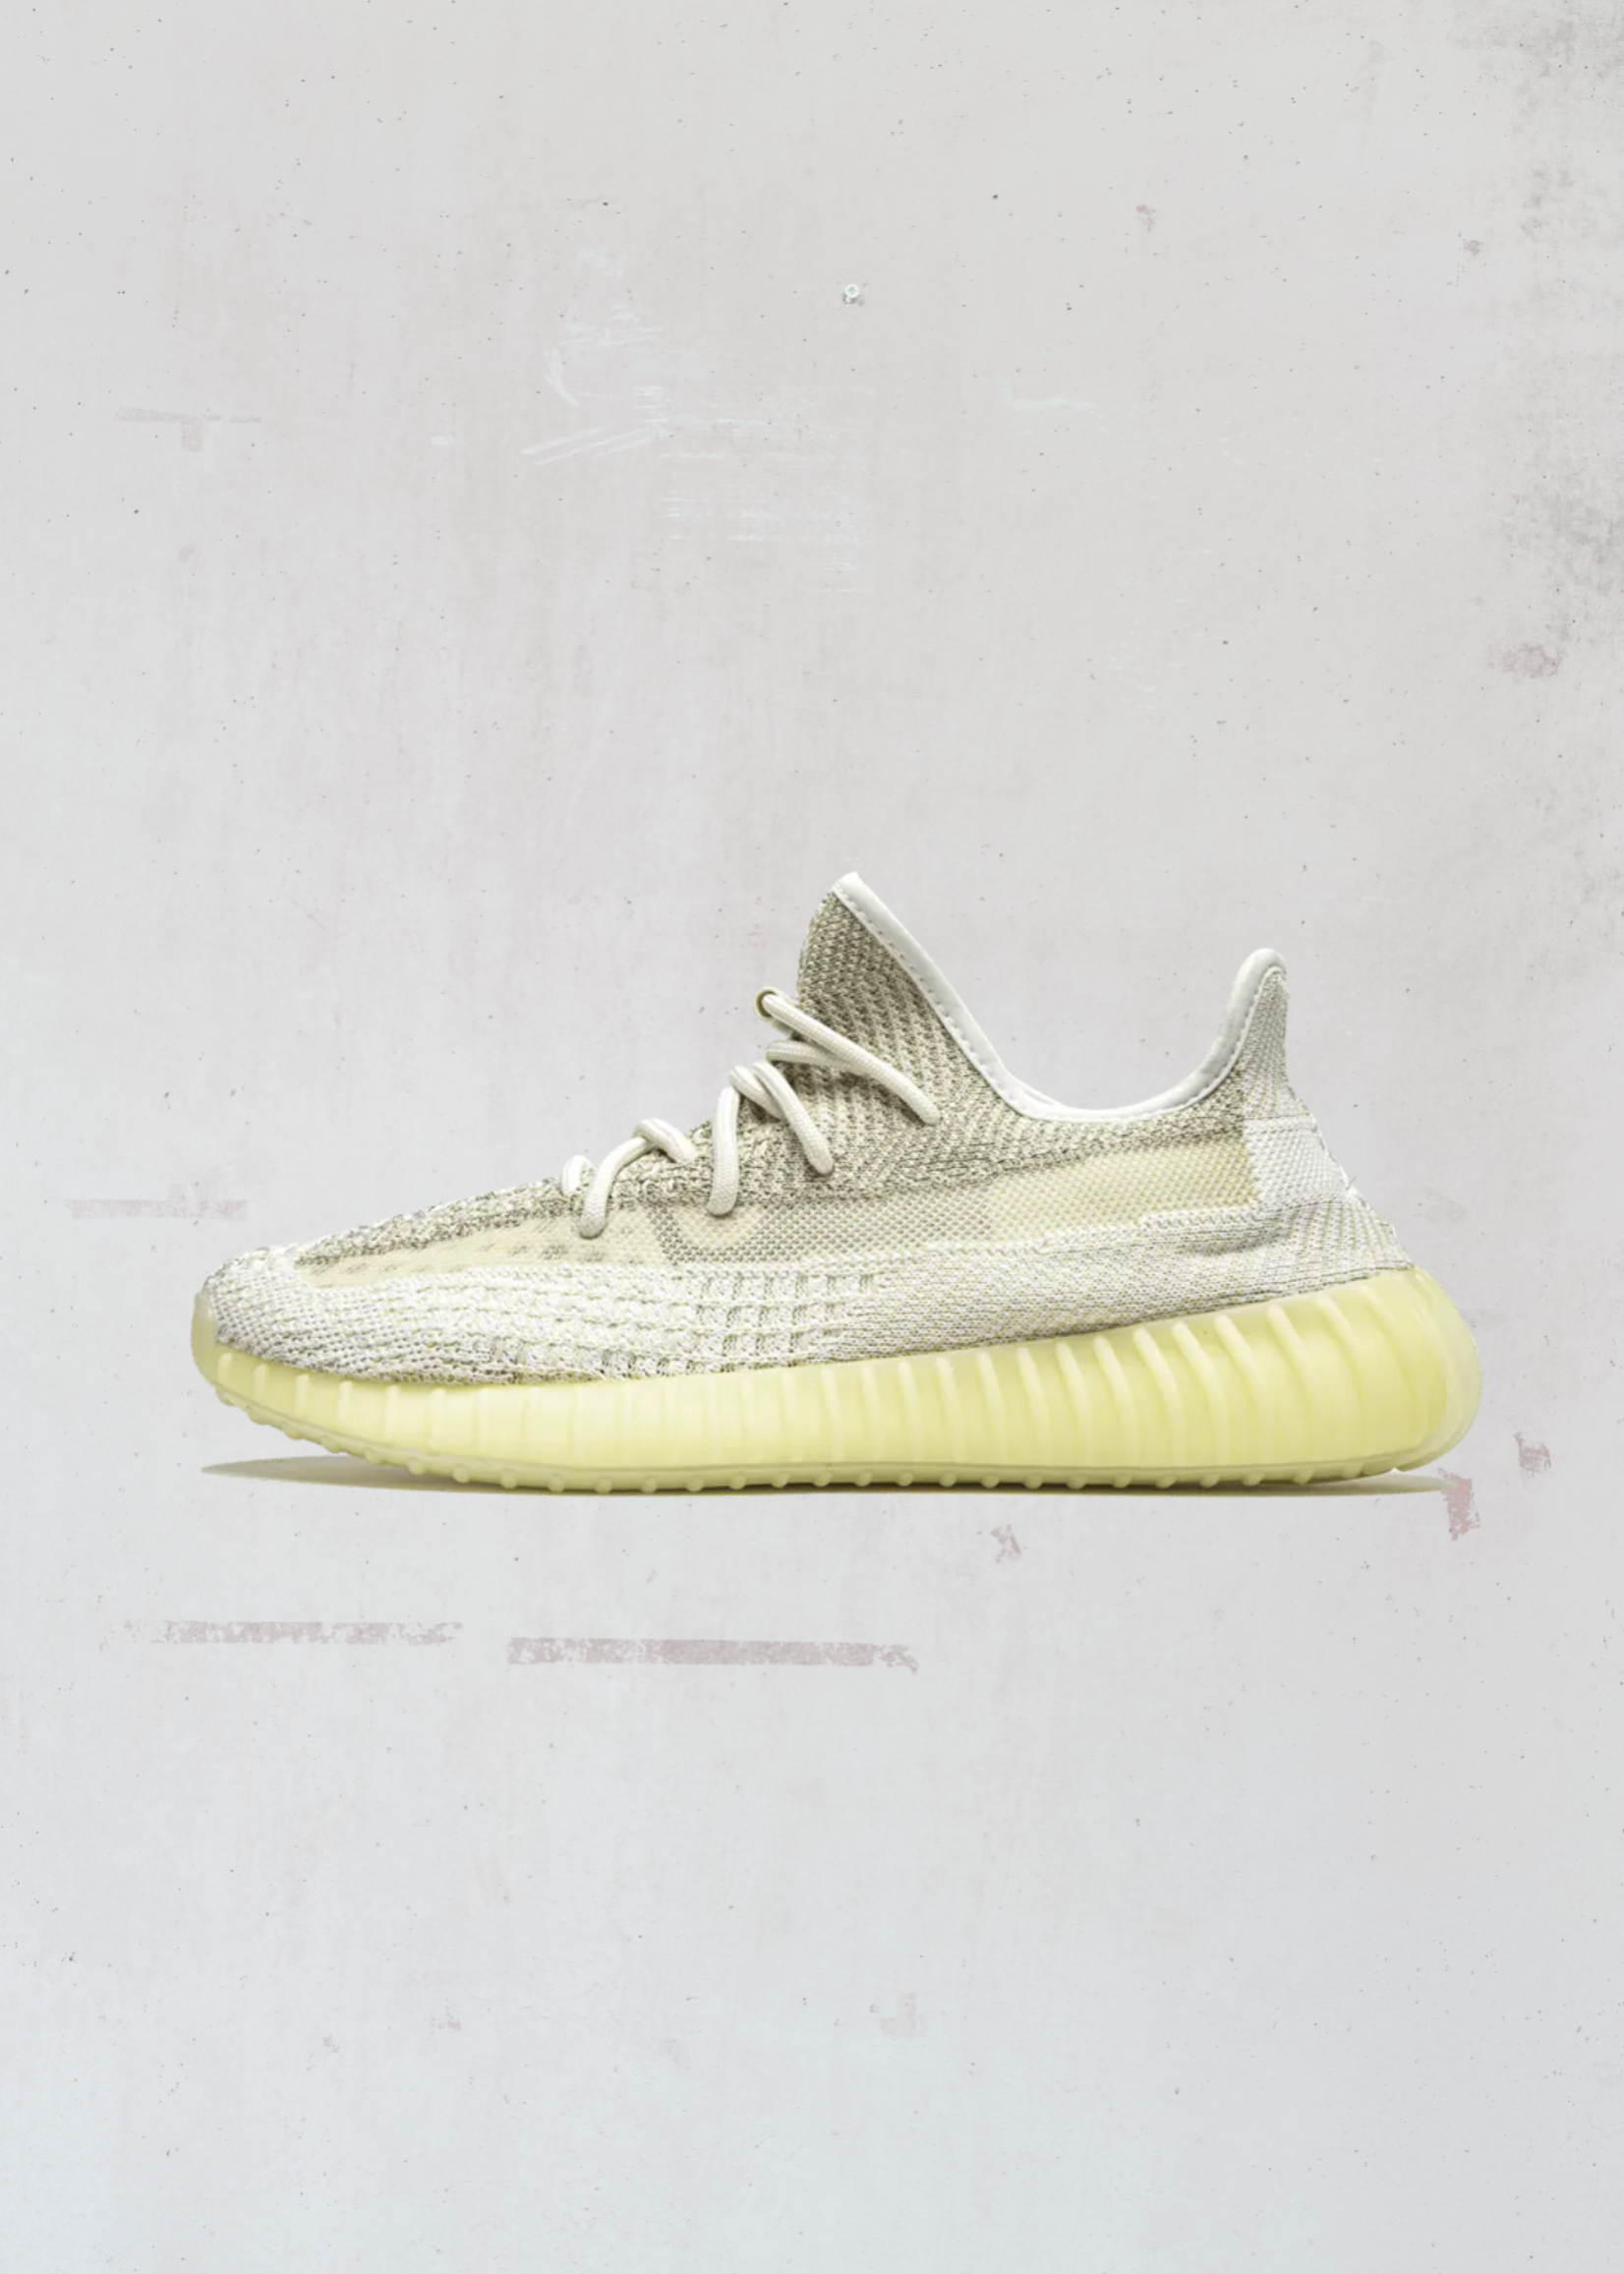 Yeezy Yeezy Boost 350 V2 Natural